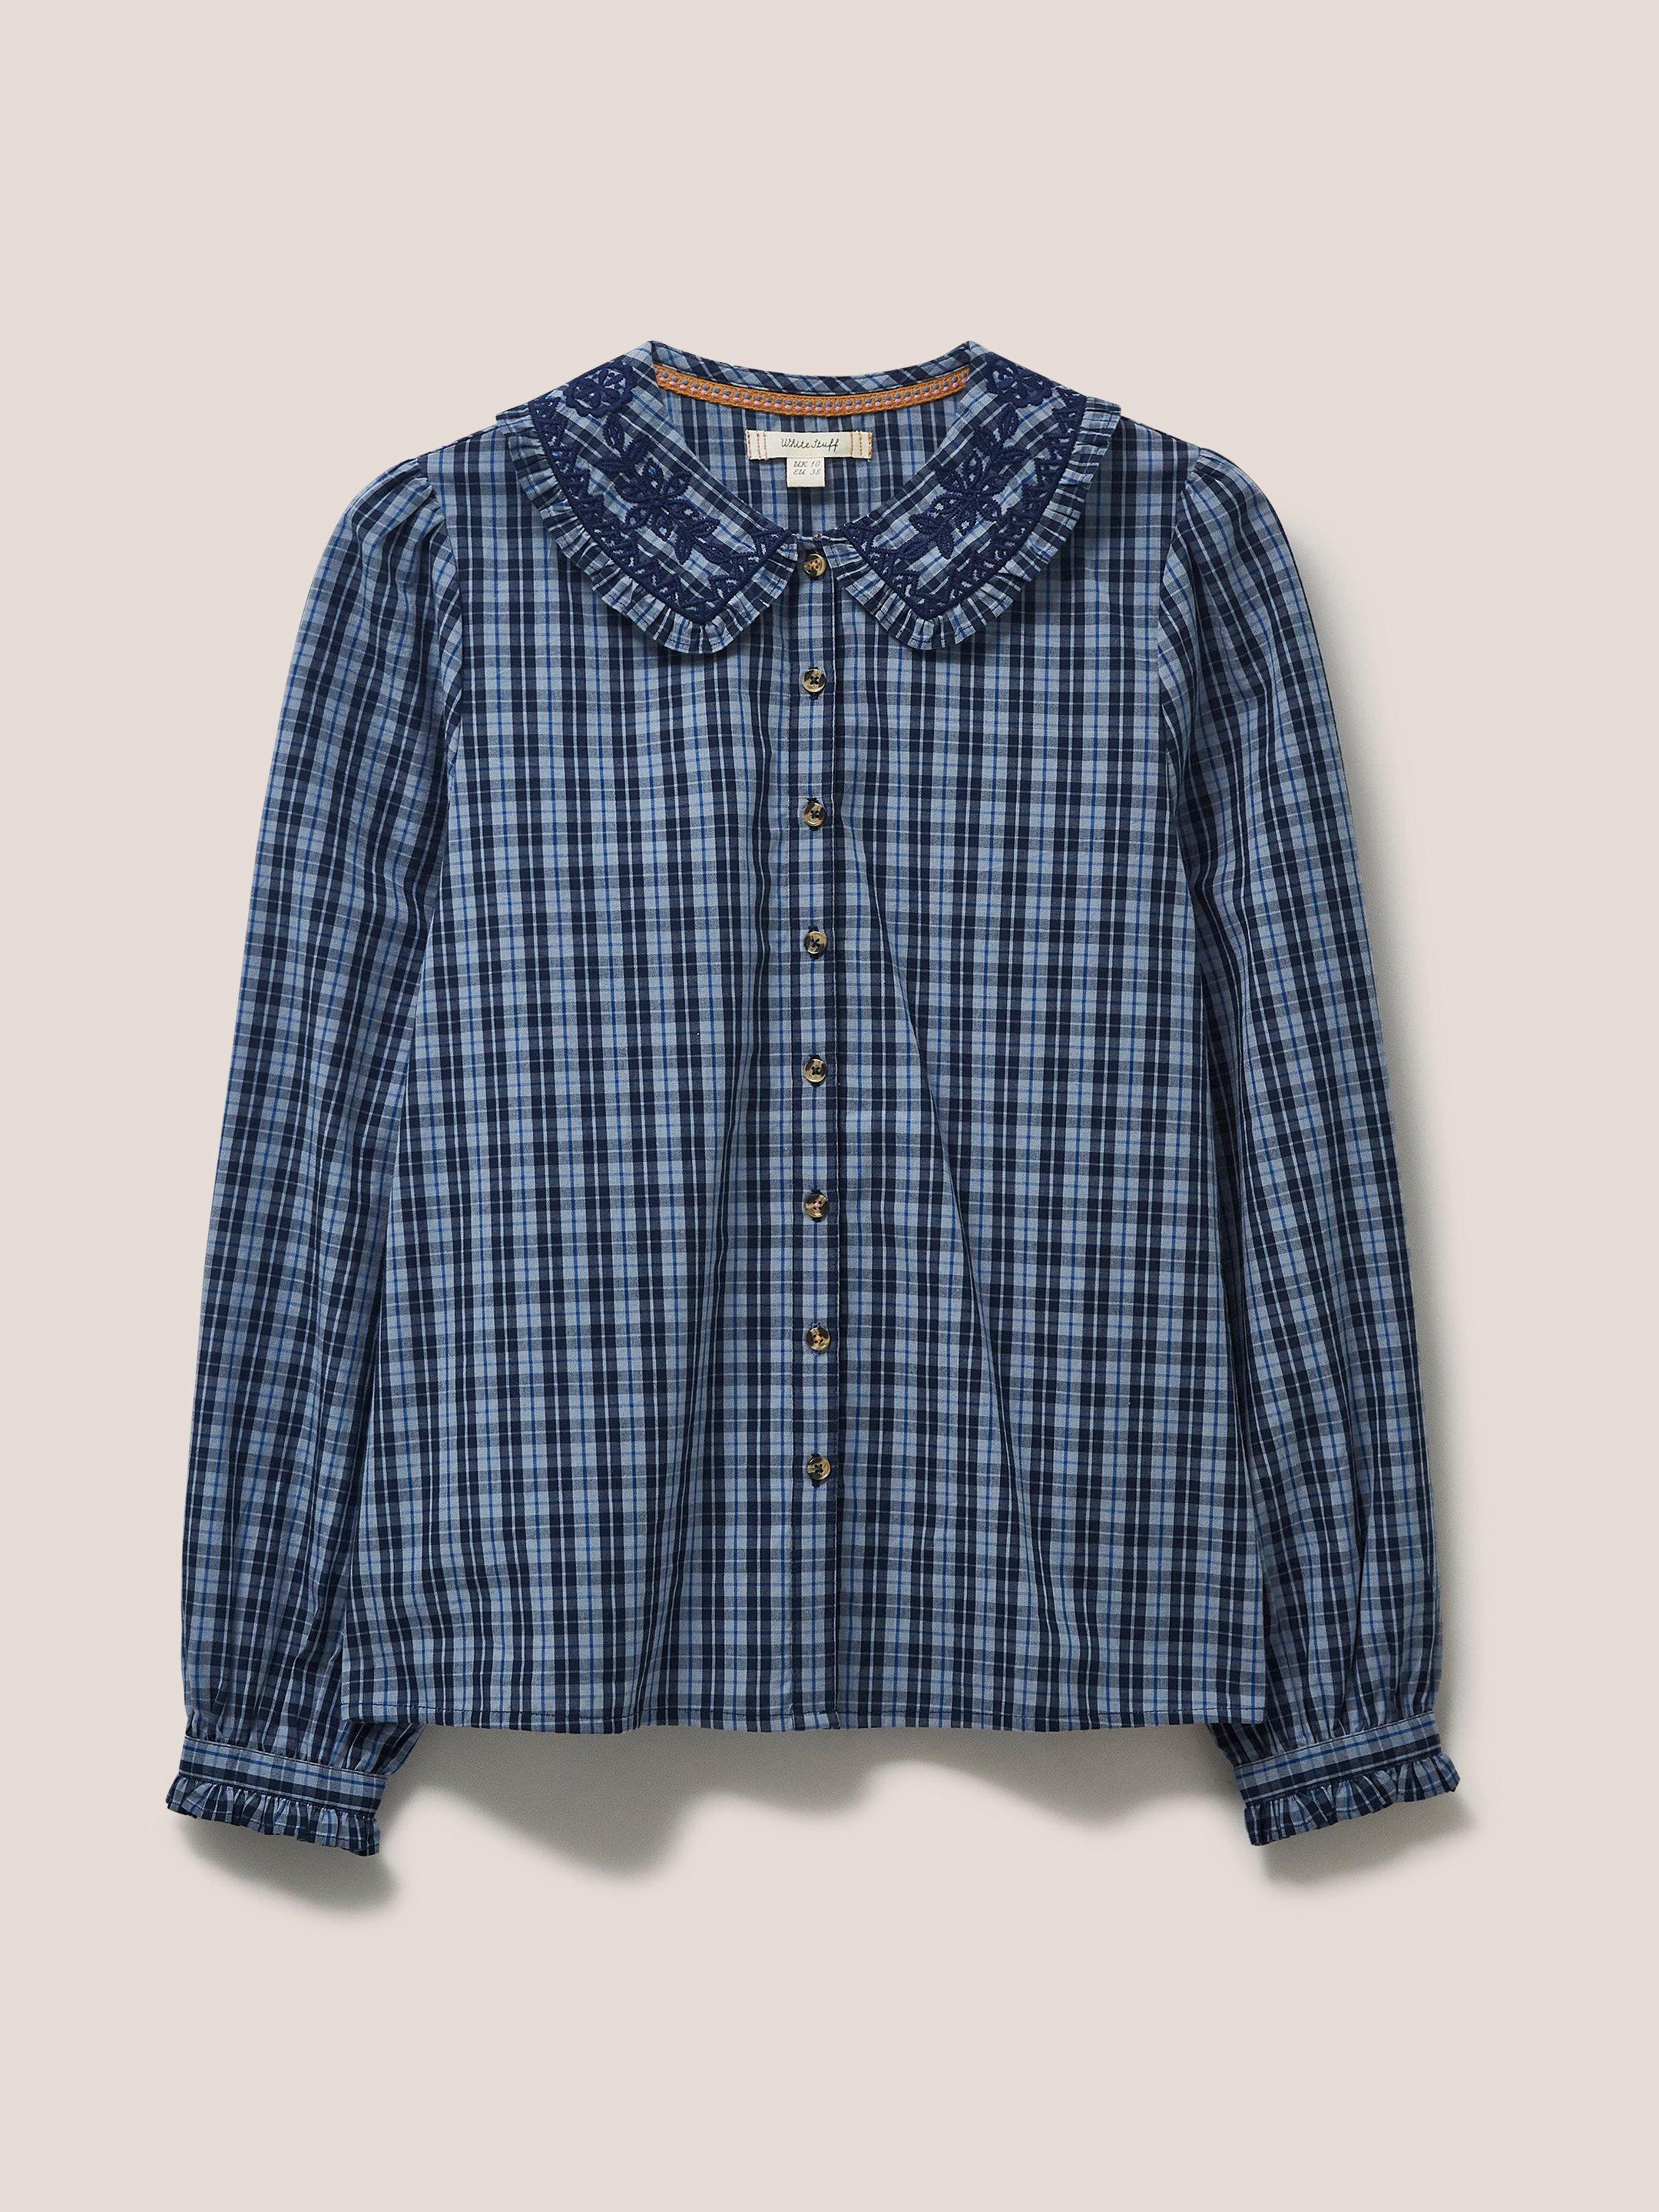 Darcy Embroidered Check Shirt in NAVY MULTI - FLAT FRONT